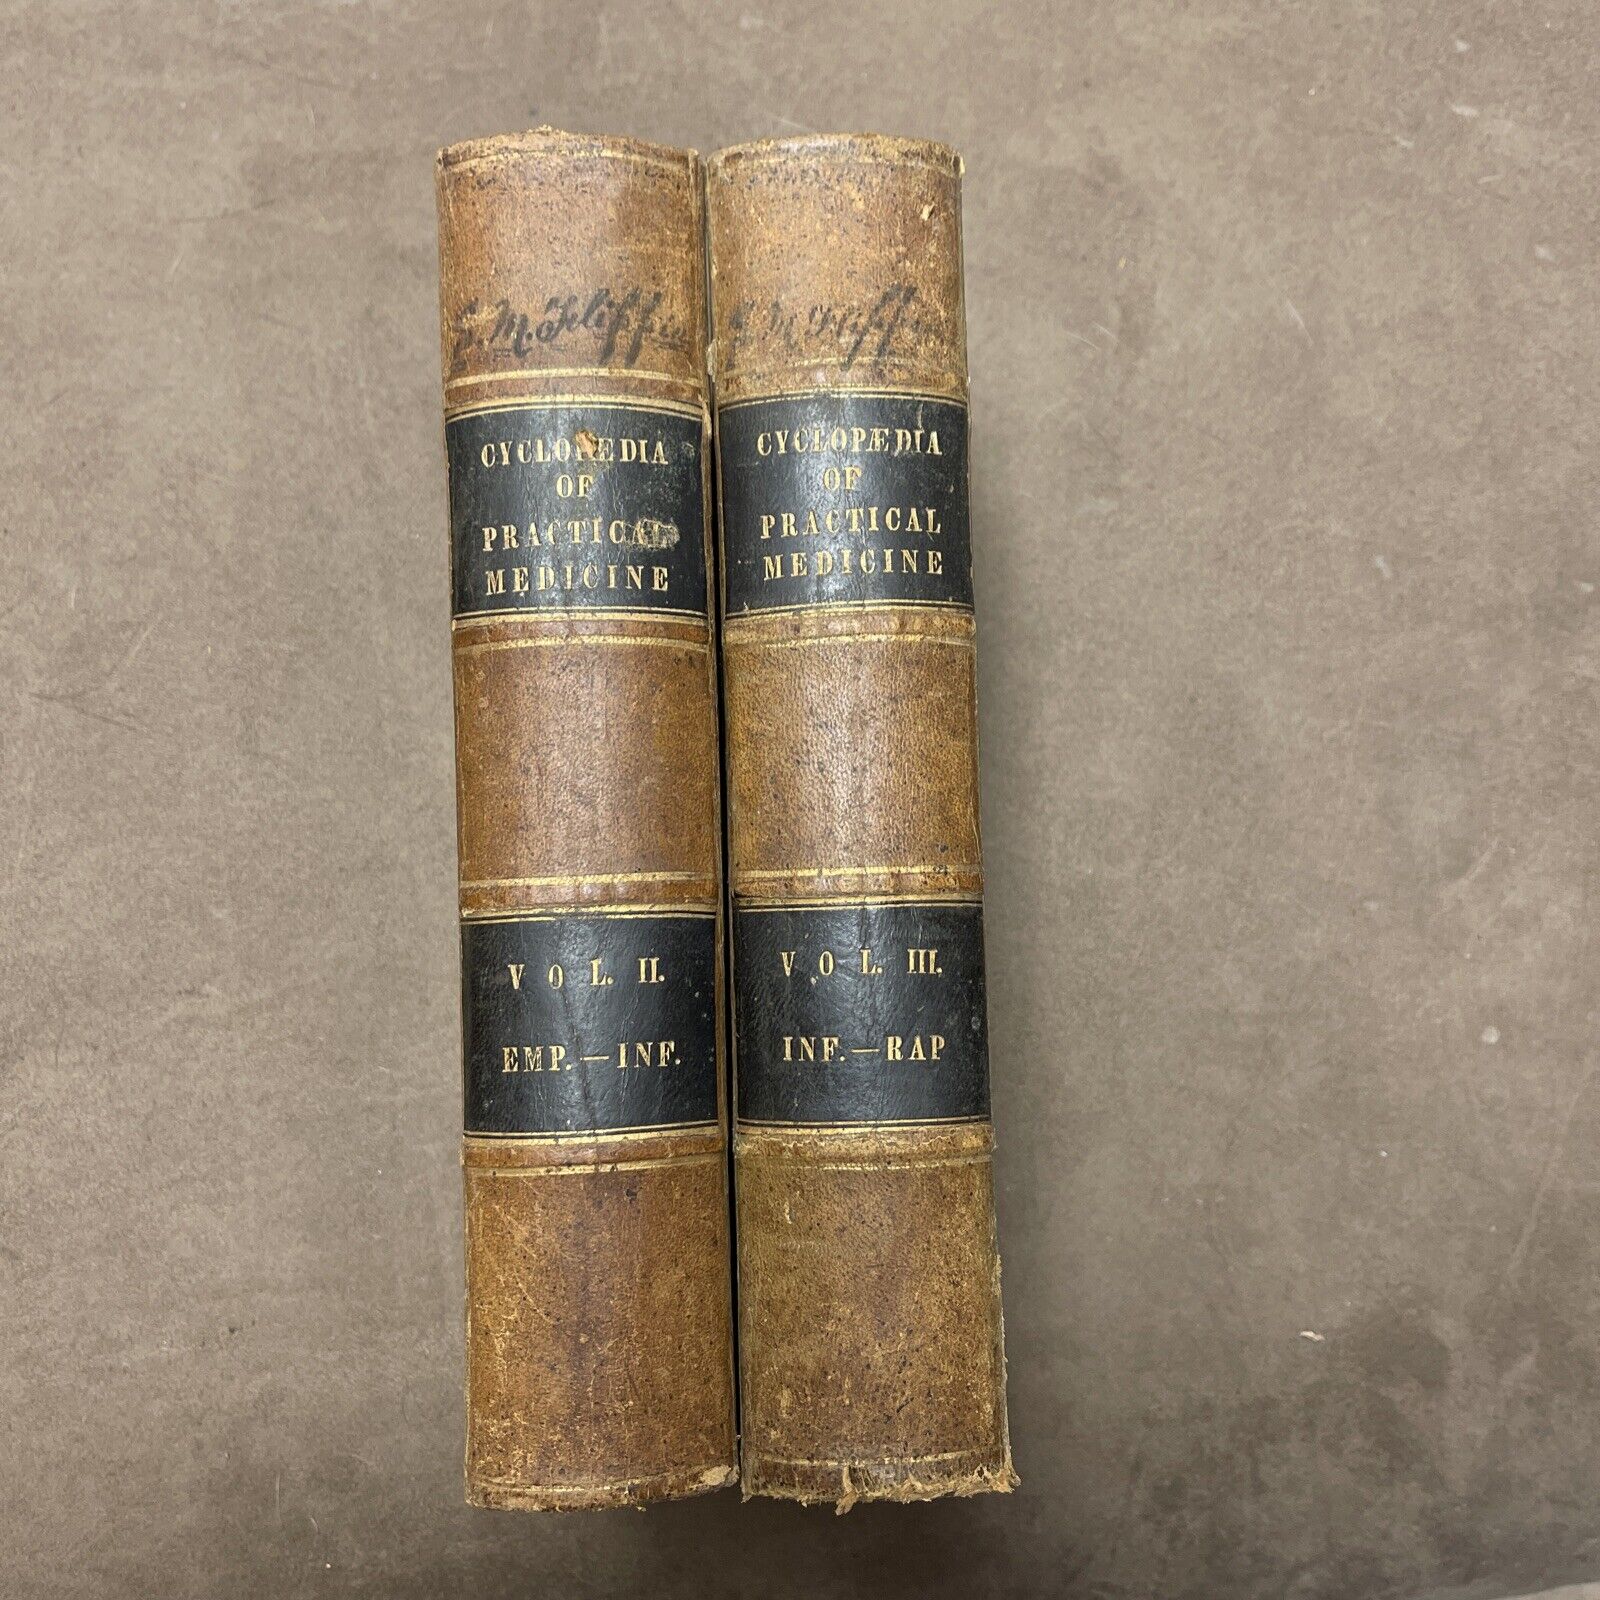 Cyclopedia of Practical Medicine 1854 vol 2 & 3 leatherbound Emp-Inf and Inf-Rap